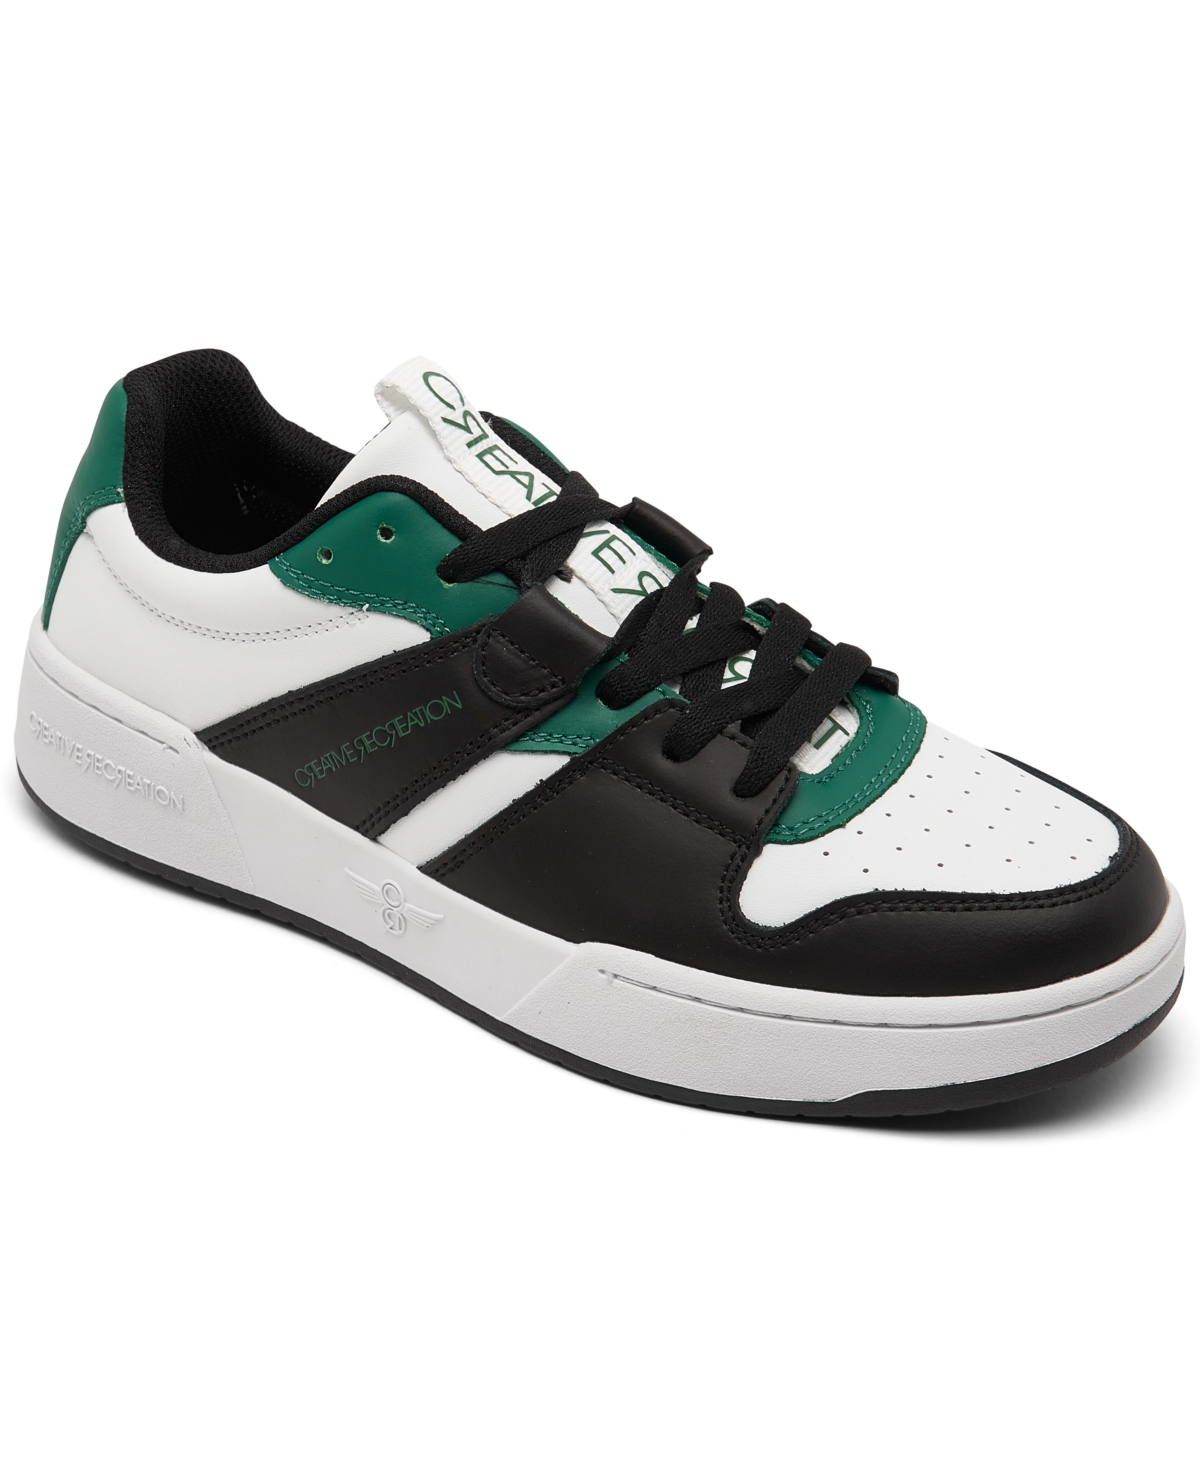 Women's Janae Low Casual Sneakers from Finish Line - White, Black, Green